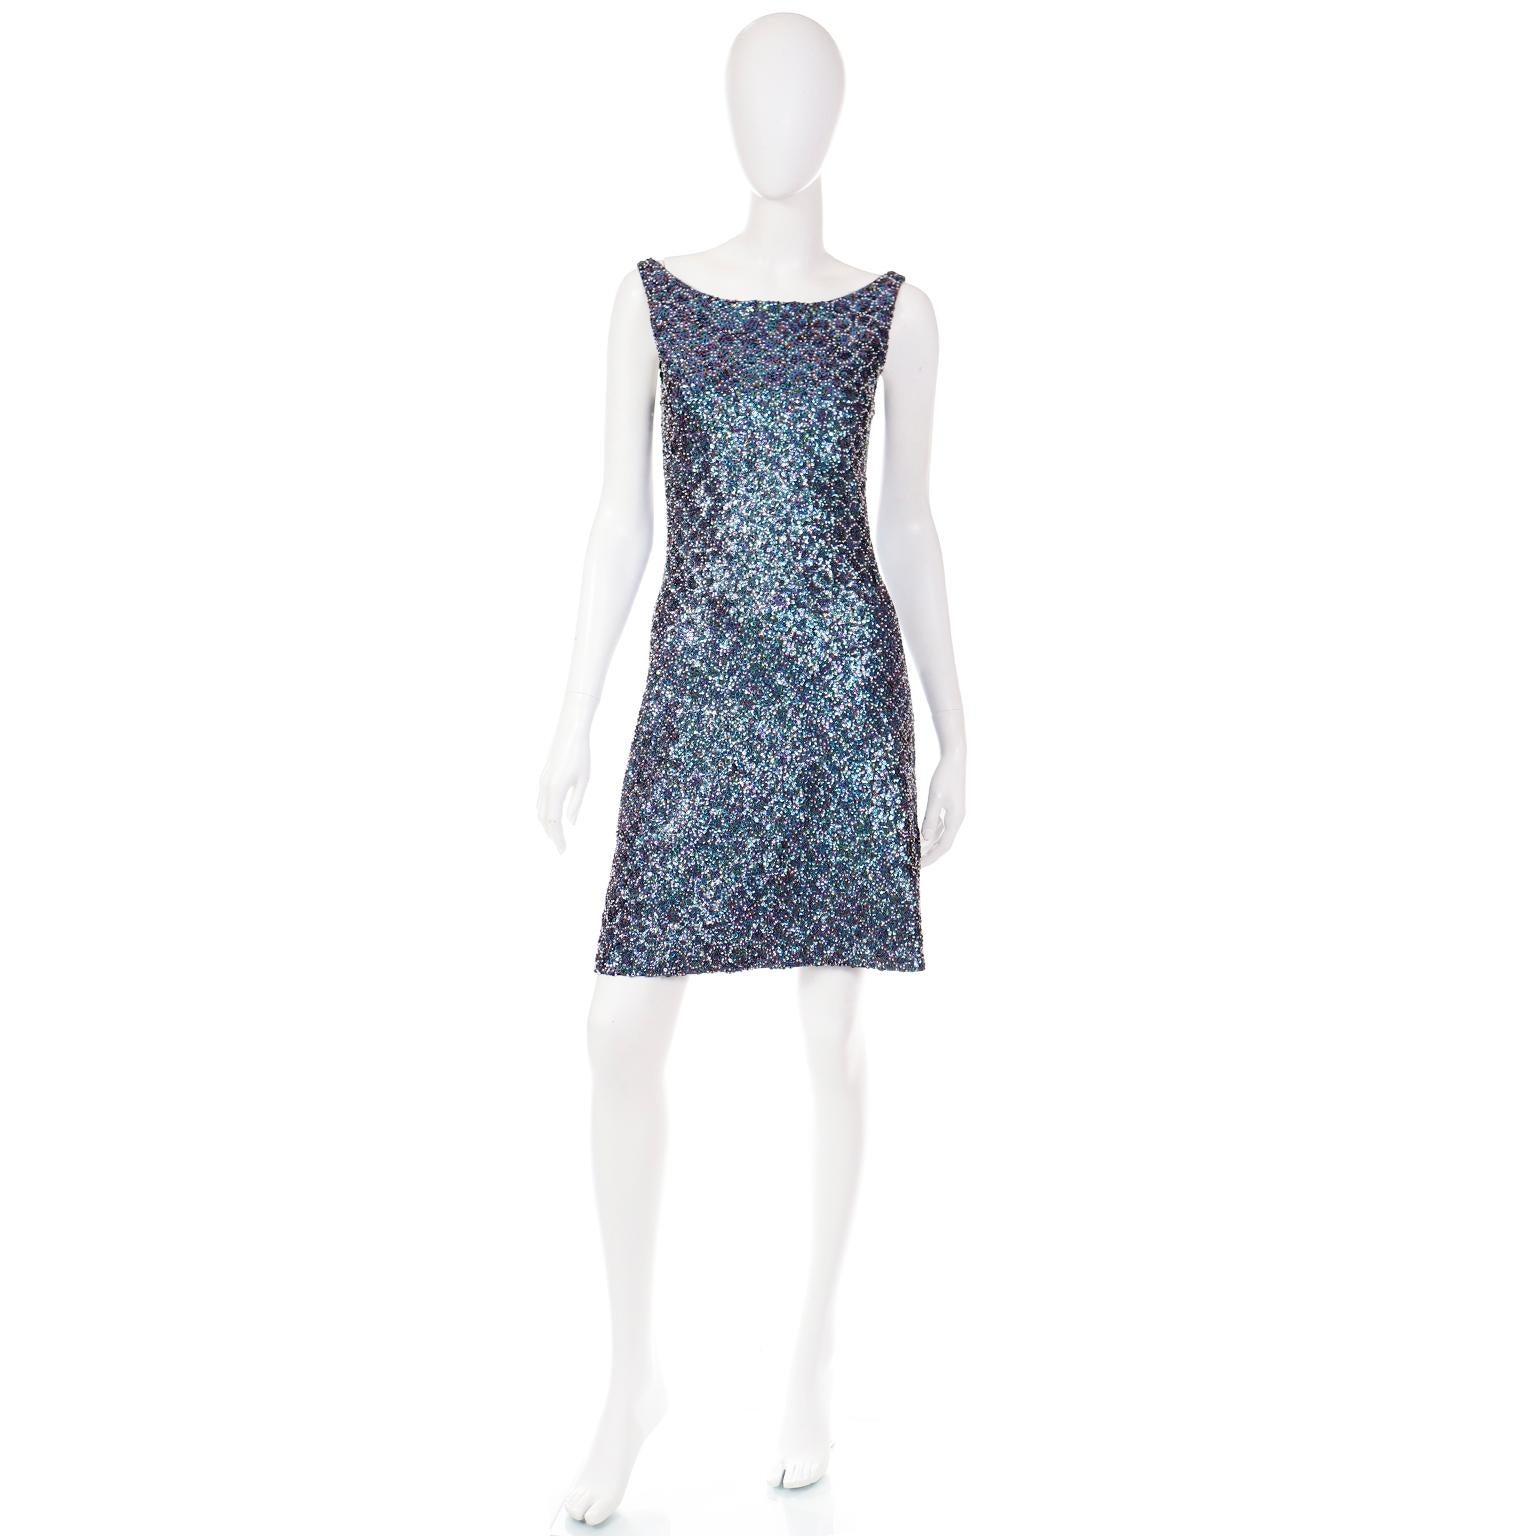 This really fun Parosh evening dress is covered in white and iridescent purple and blue beads and sequins. This easy to wear dress is such a great piece to have in your closet! The base of the dress is a nylon spandex blend so there is some stretch